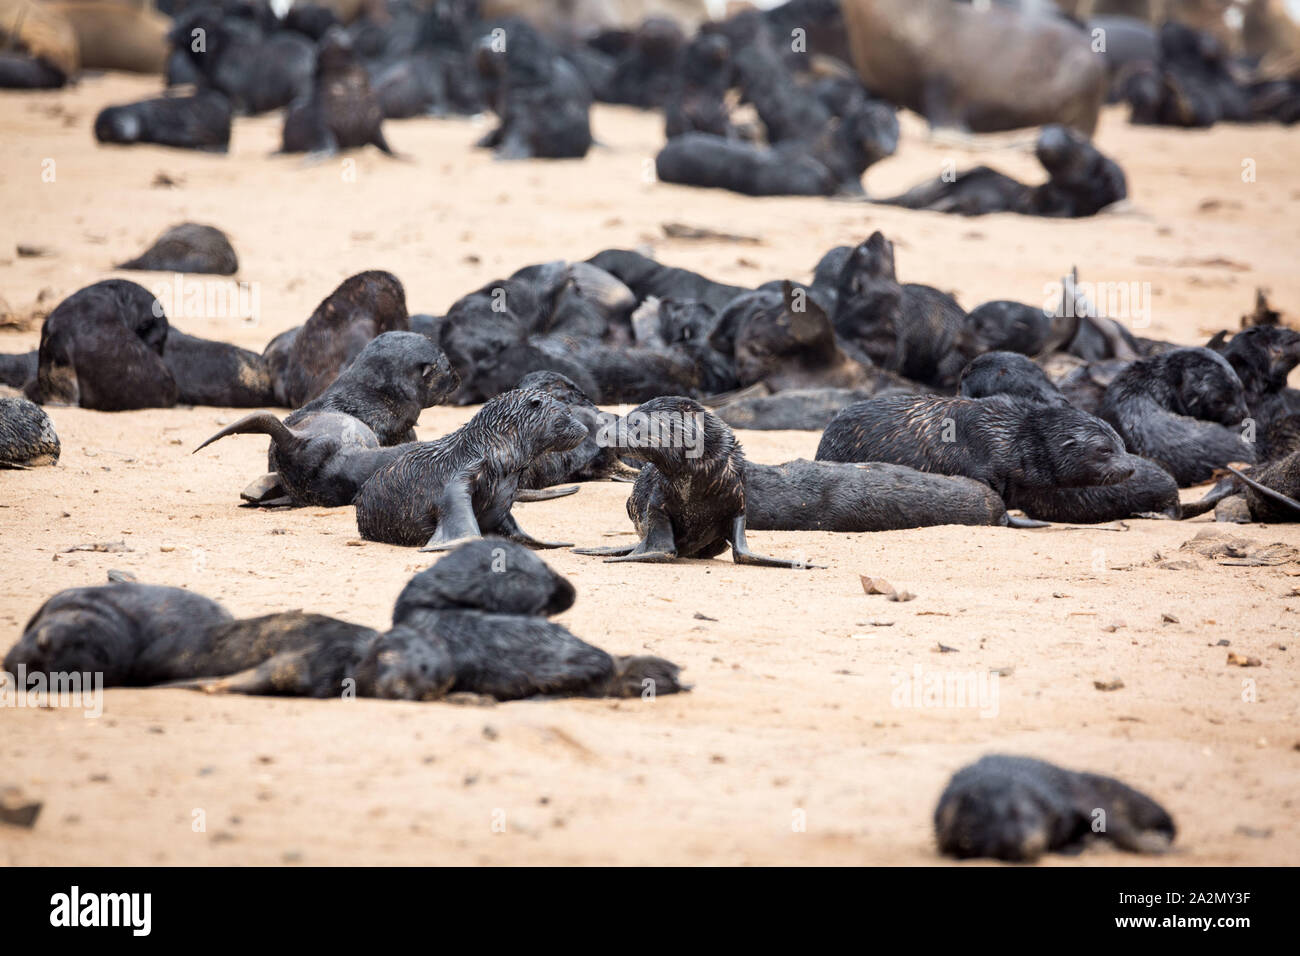 South African Fur Seal babies in the middle of their colony at Cape Cross Seal Reserve, Namibia, Africa Stock Photo